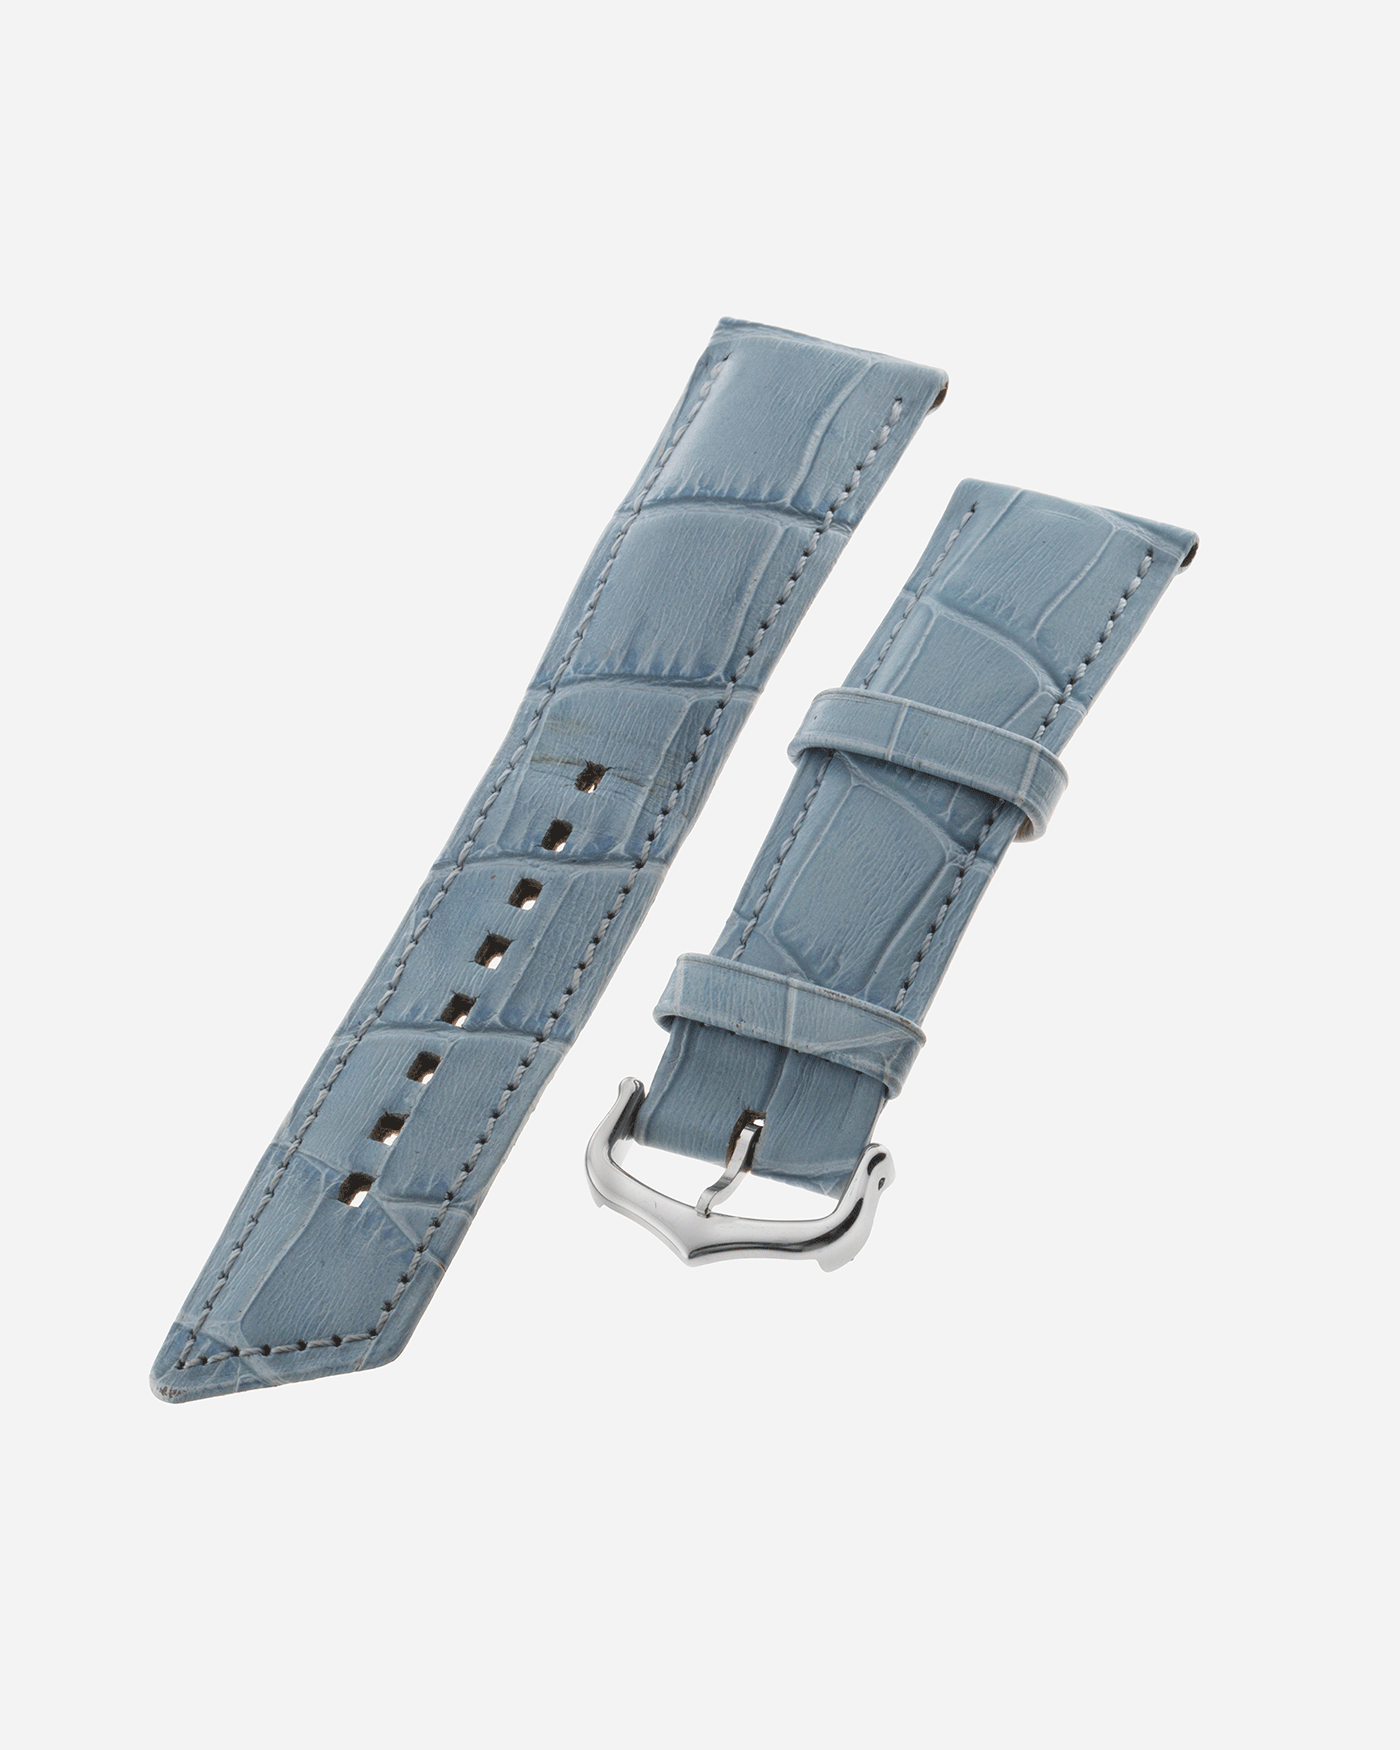 Brand: Cartier Year: 2001 Model: Tank Basculante Millenium Reference: 2390 Material: Stainless Steel Movement: Piguet-derived Cartier cal. 050 MC Case Diameter: 26 x 38mm Strap: Navy Blue Molequin Textured Calf Strap with separate Stainless Steel Cartier Tang Buckle